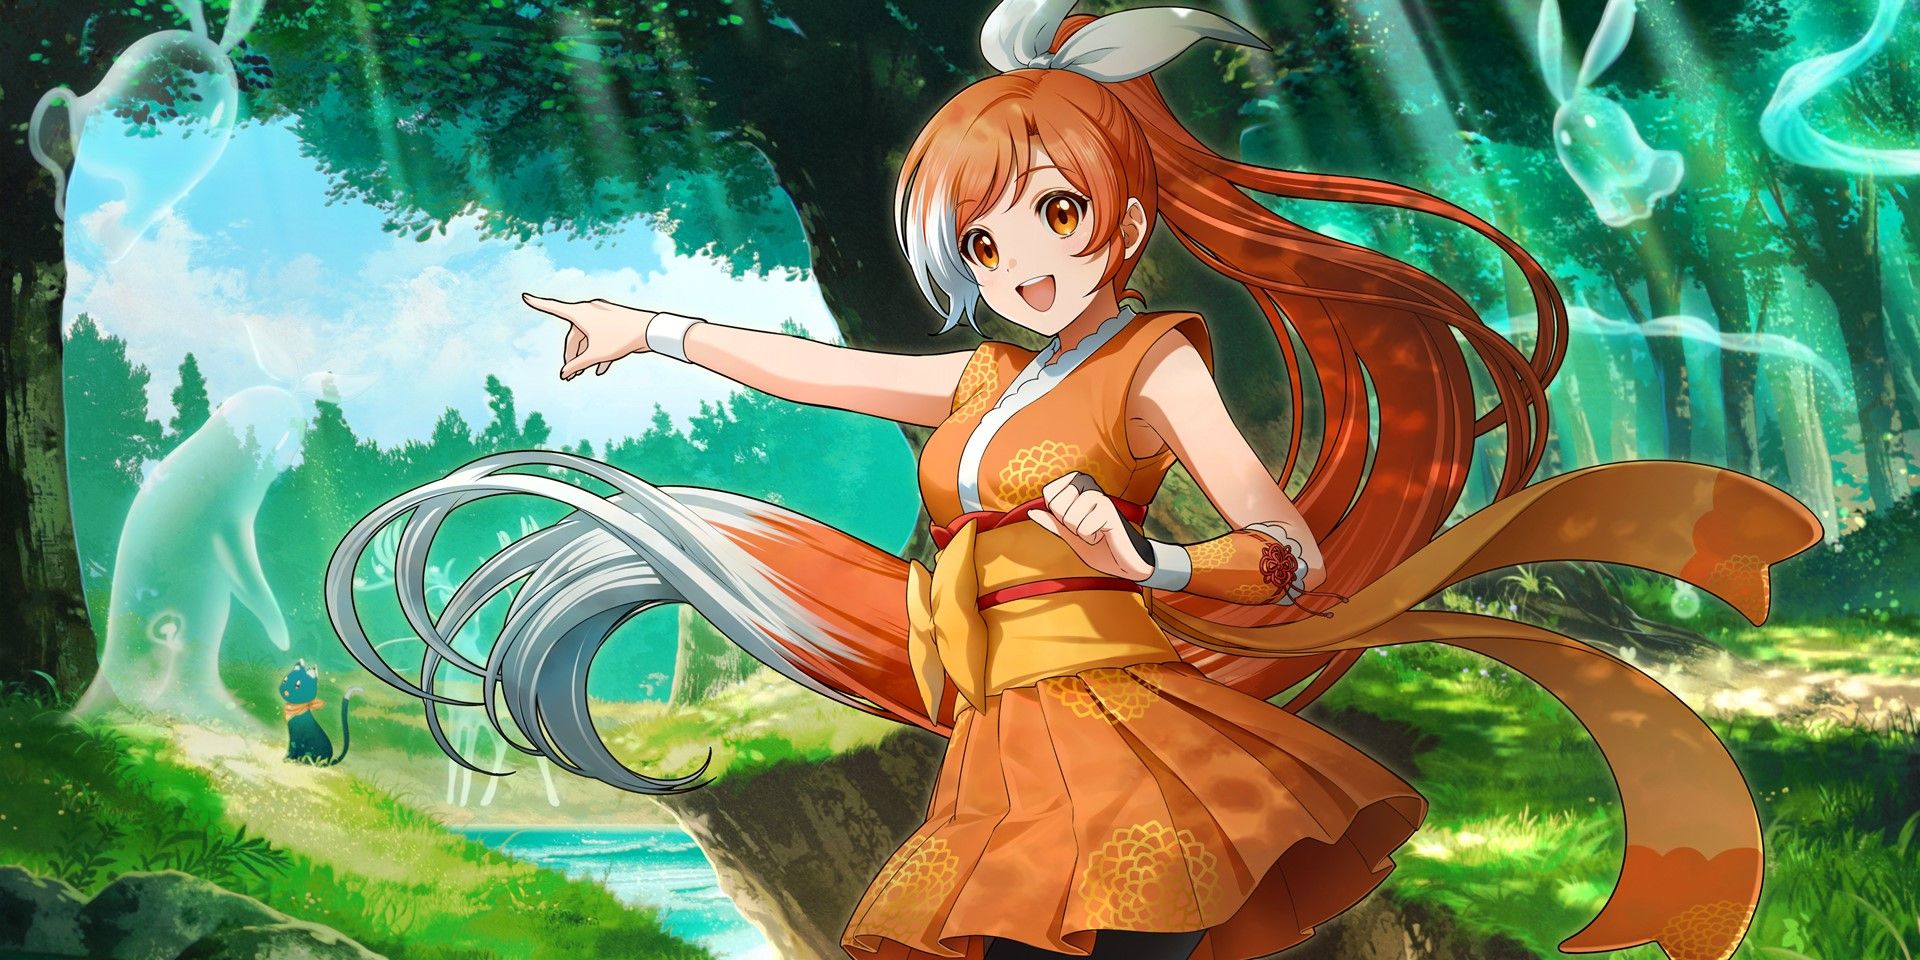 Official visual of Crunchyroll's Hime mascot pointing in the distance in a magical forest